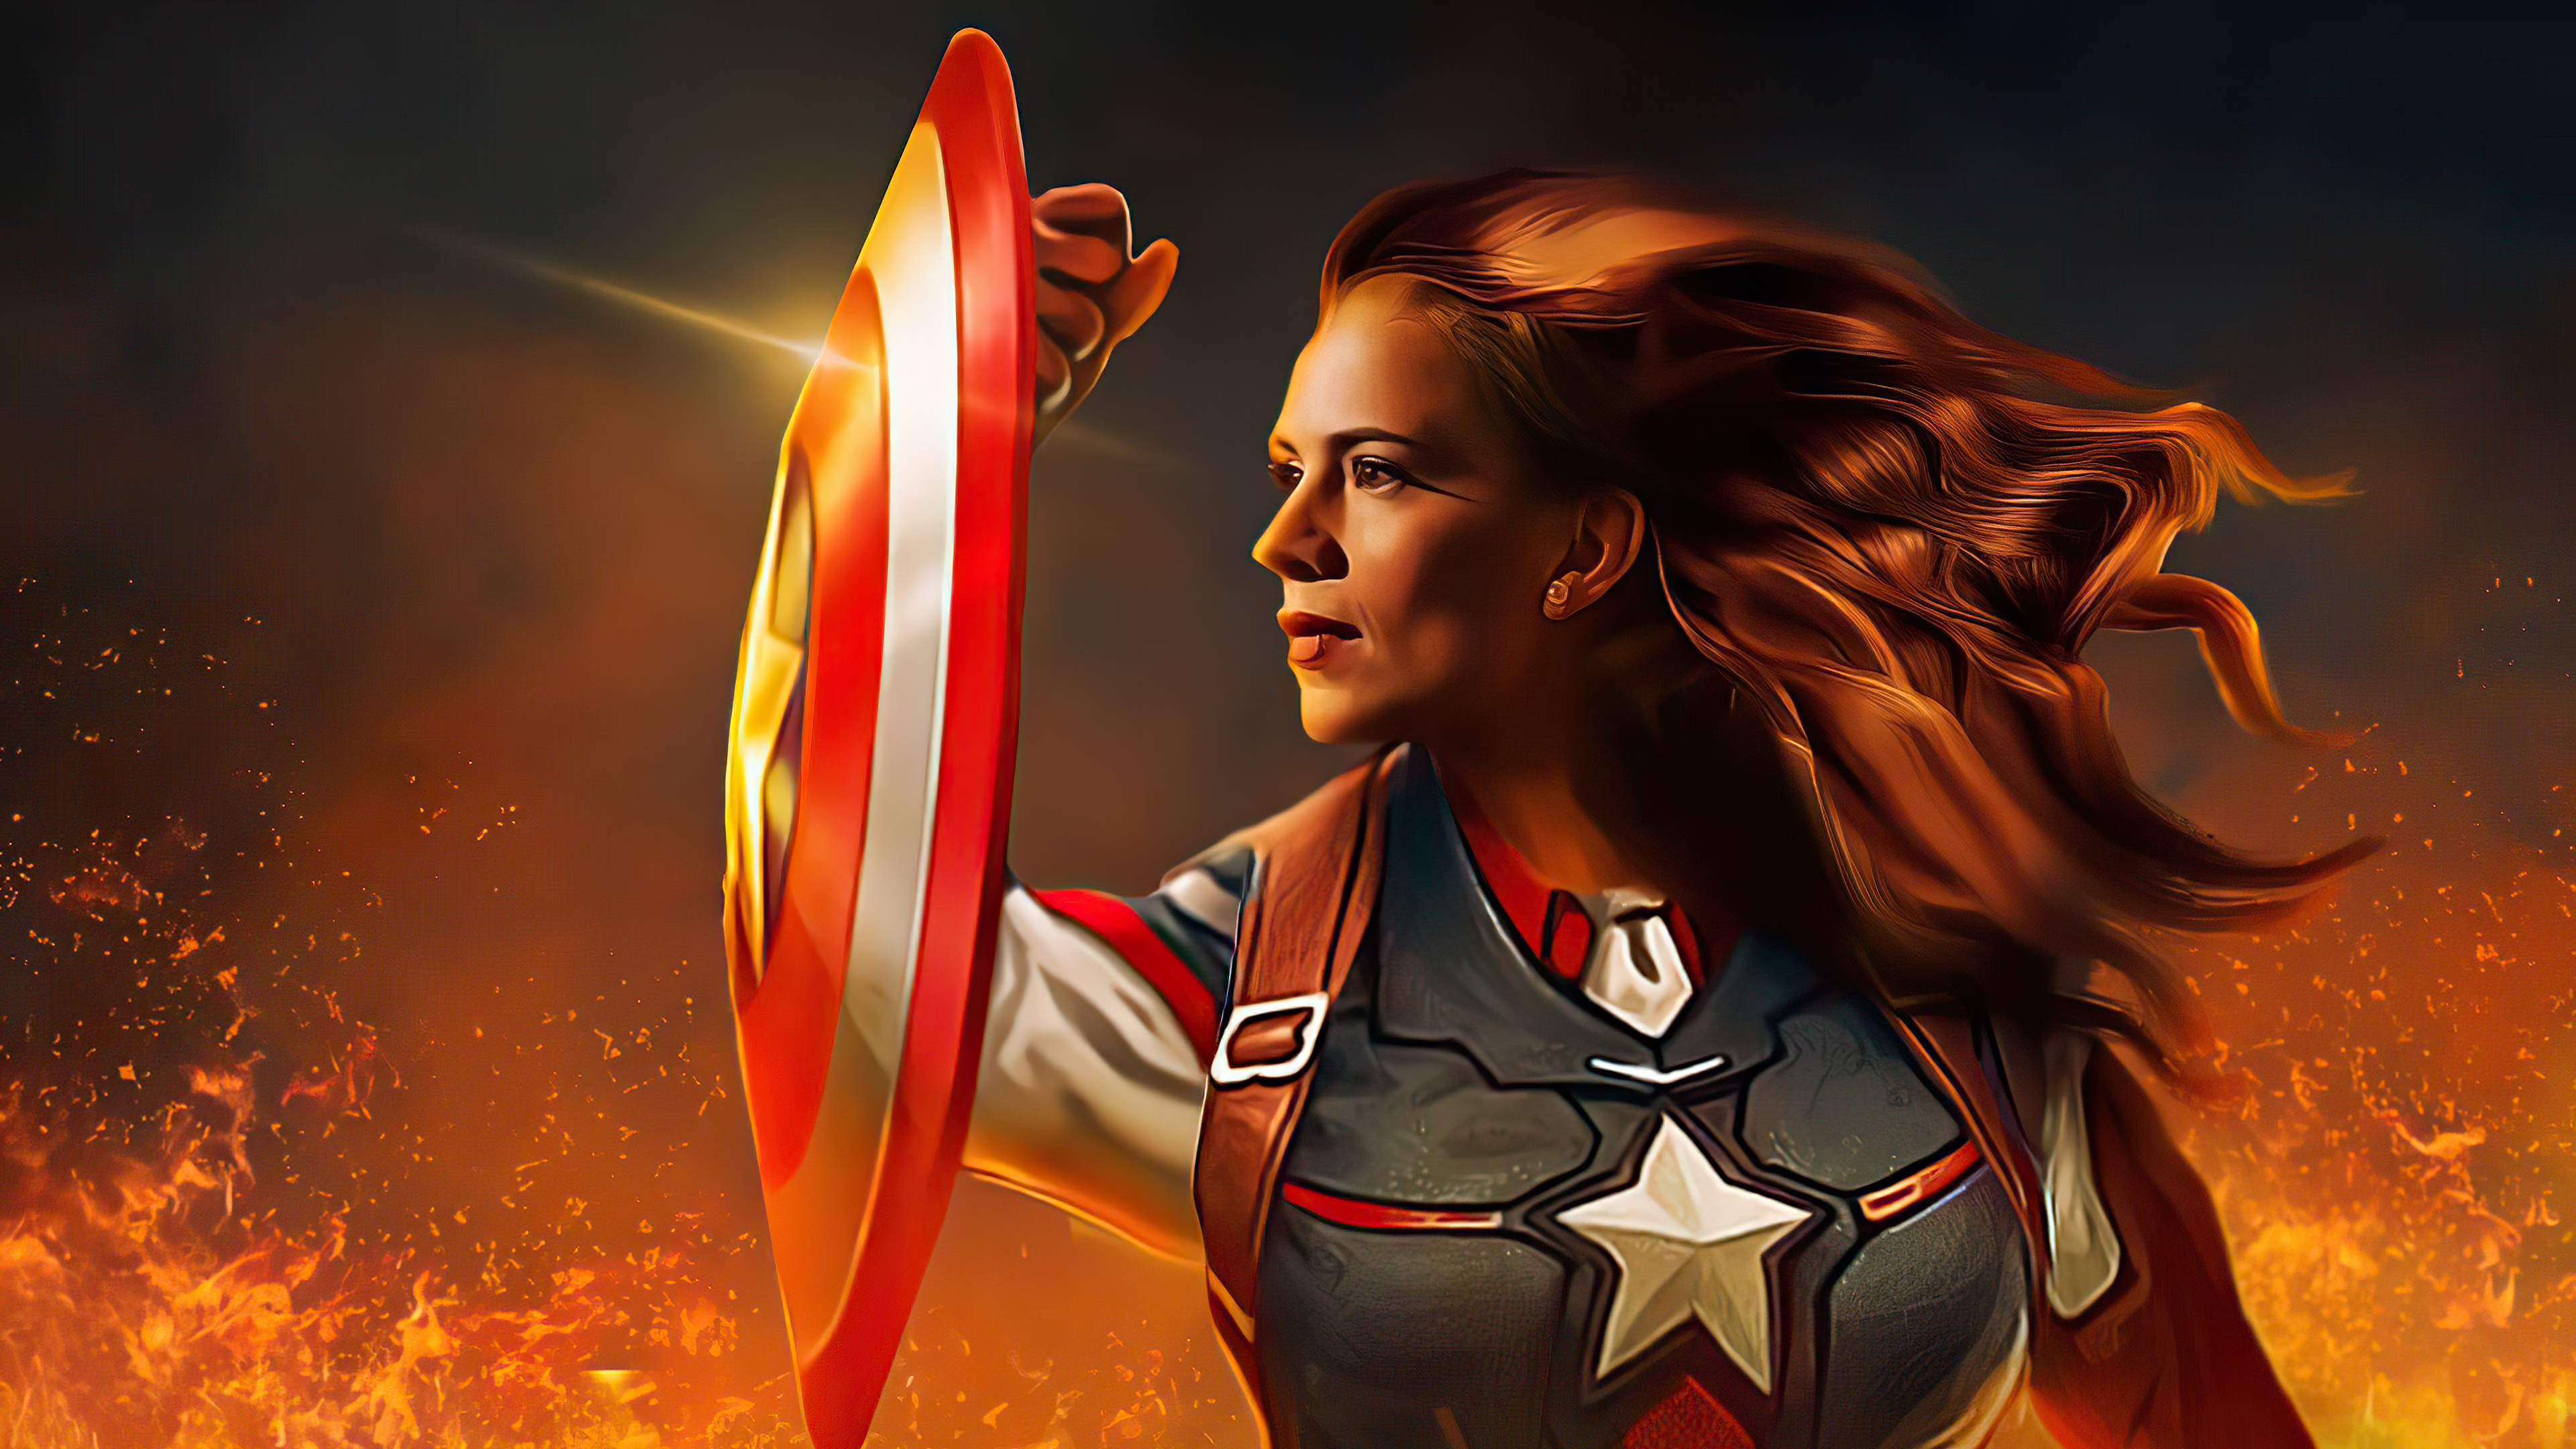 Wallpaper What If, Peggy Carter, Hayley Atwell, Captain America, Marvel  Cinematic Universe, Background - Download Free Image